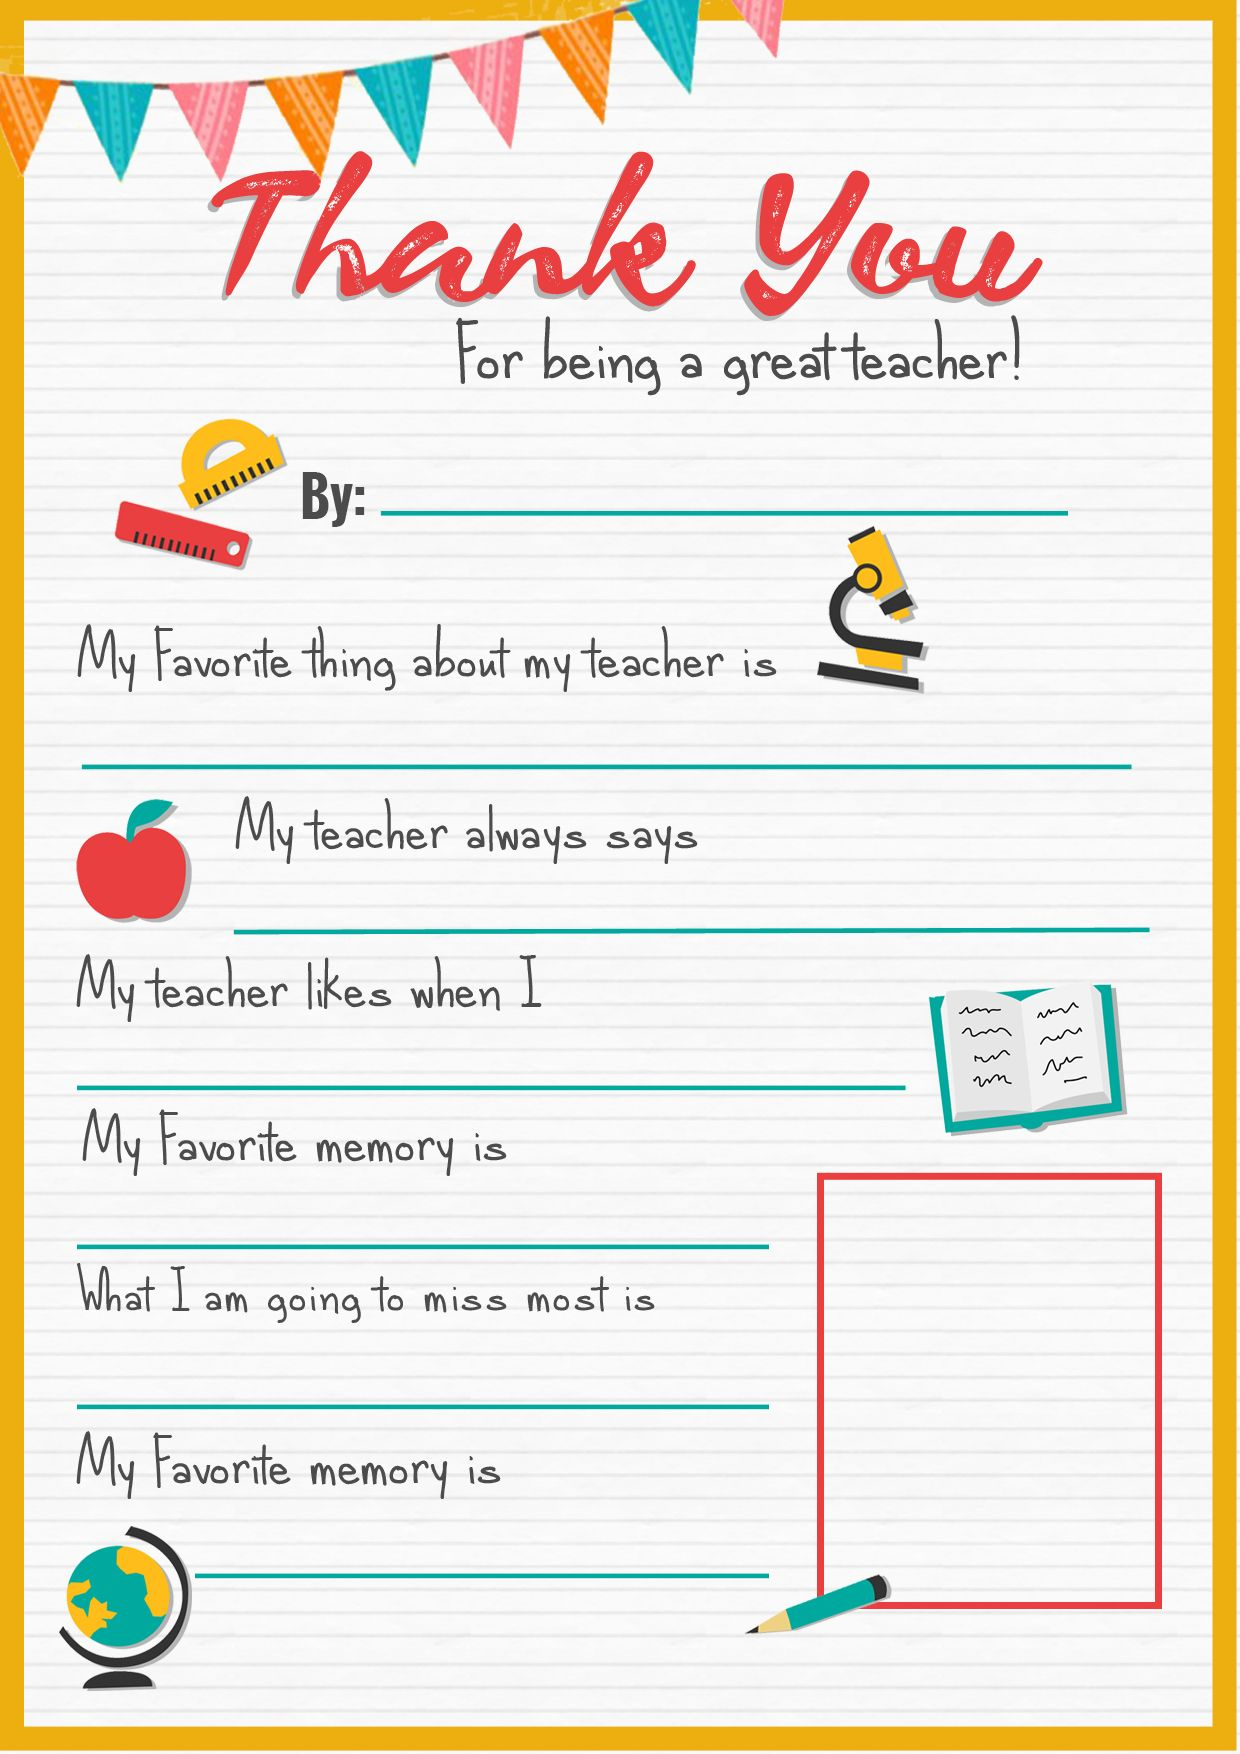 Thank You Teacher - A Free Printable | Stay At Home Mum | Teacher - All About My Teacher Free Printable